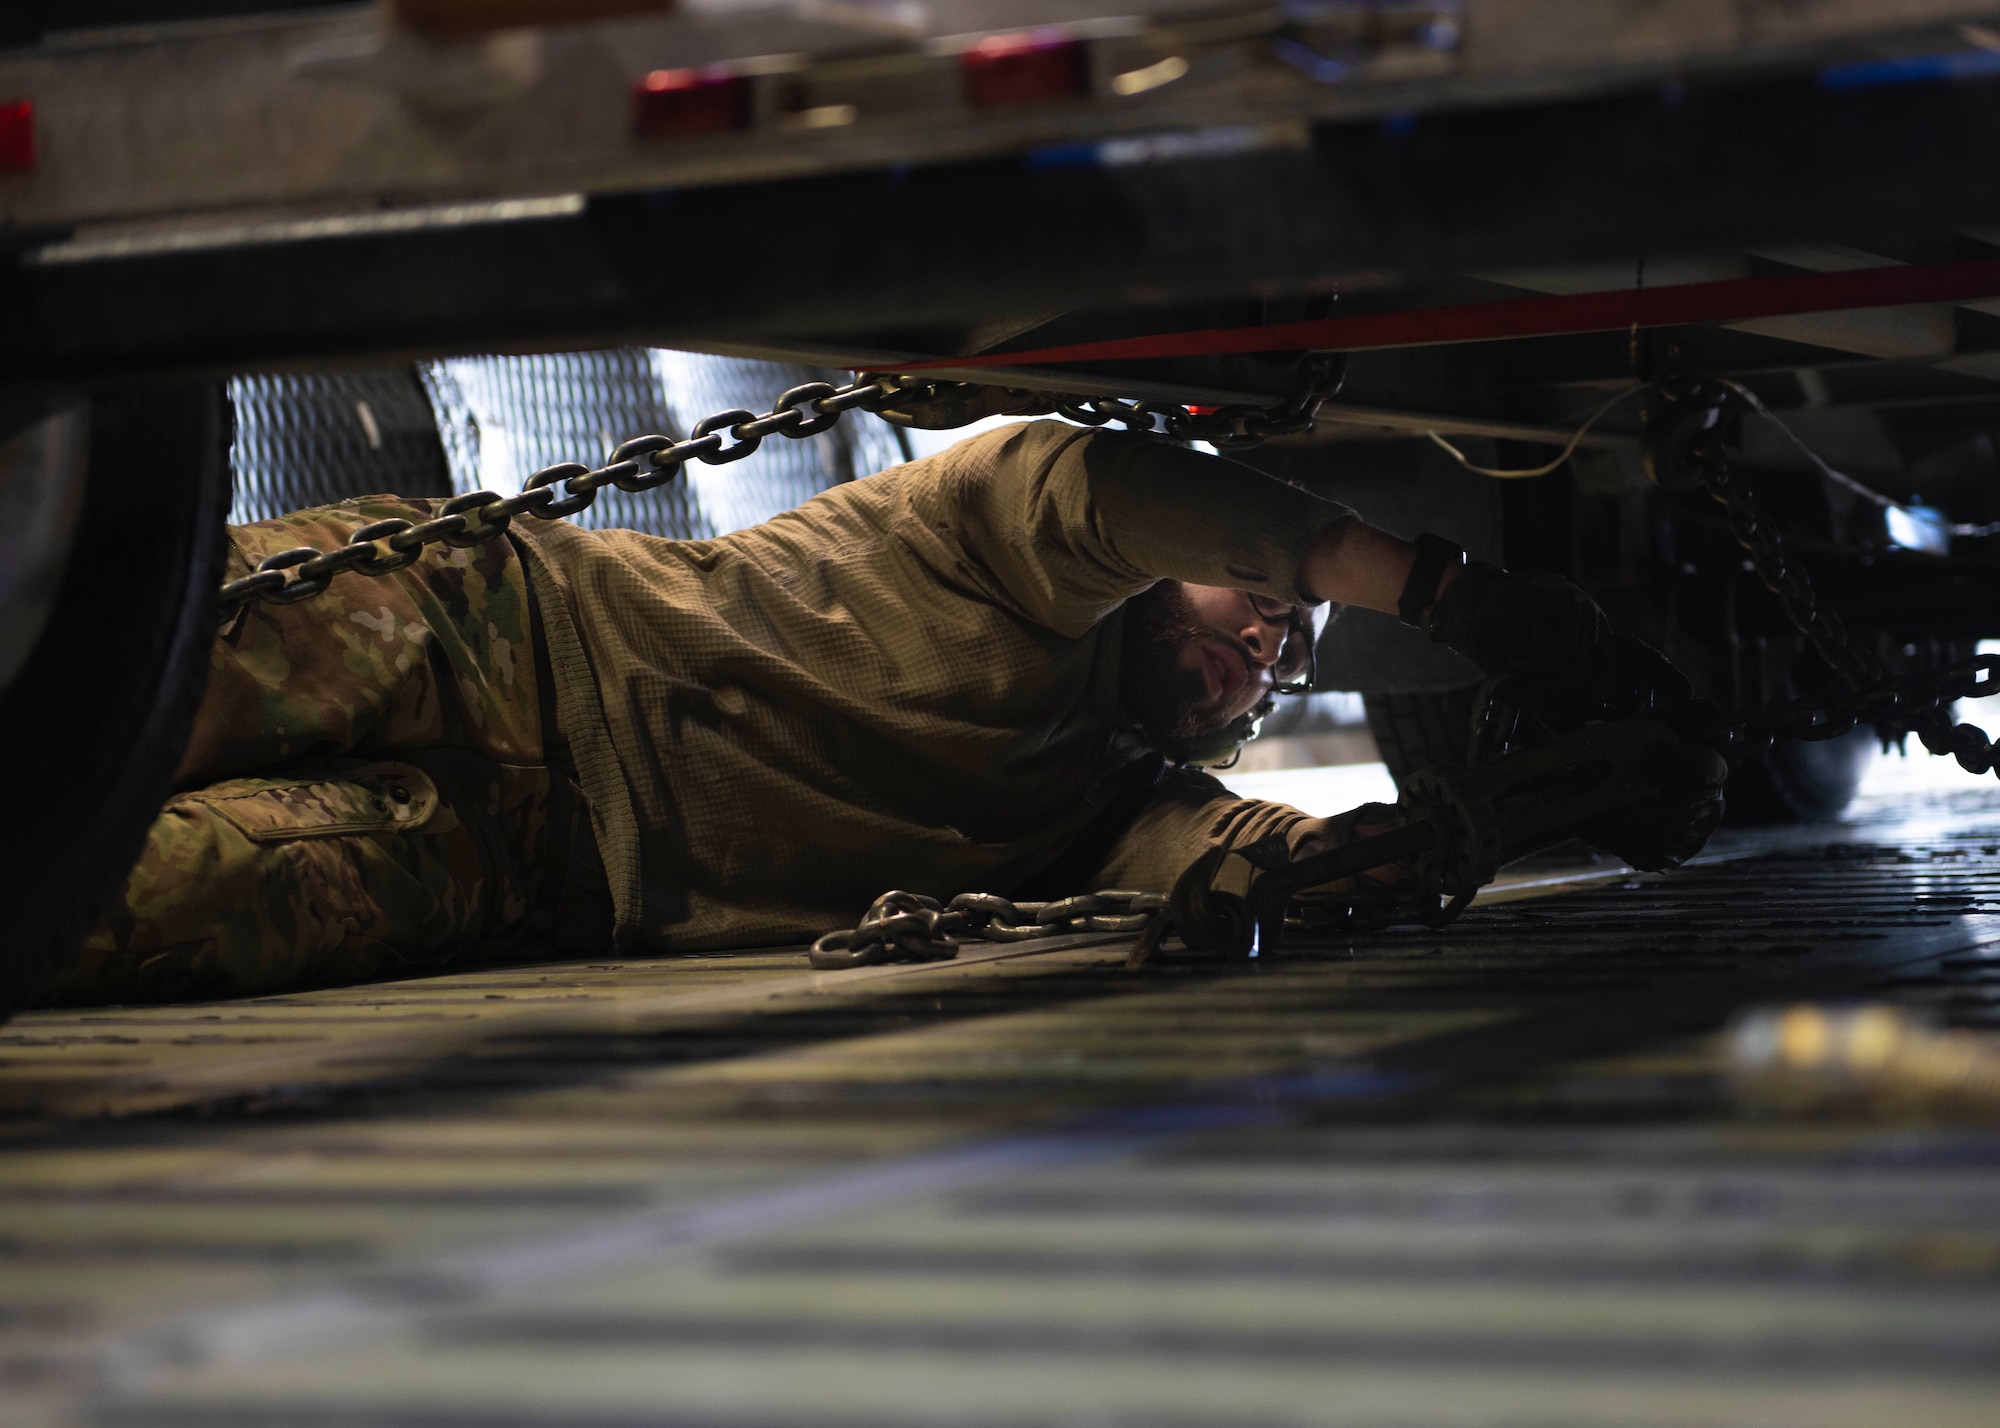 U.S. Air Force Senior Airmen Ameer Haddad, 22nd Airlift Squadron loadmaster, secures cargo inside the C-5M Super Galaxy at Joint Base Lewis-McChord, Wash., Dec. 8, 2023. The joint operation consisted of loading cargo and mini submersibles on the aircraft and was conducted by service members from Travis Air Force Base, Calif., Joint Base Pearl Harbor-Hickam, Hawaii, and JBLM. (U.S. Air Force photo by Airman 1st Class Megan Geiger)